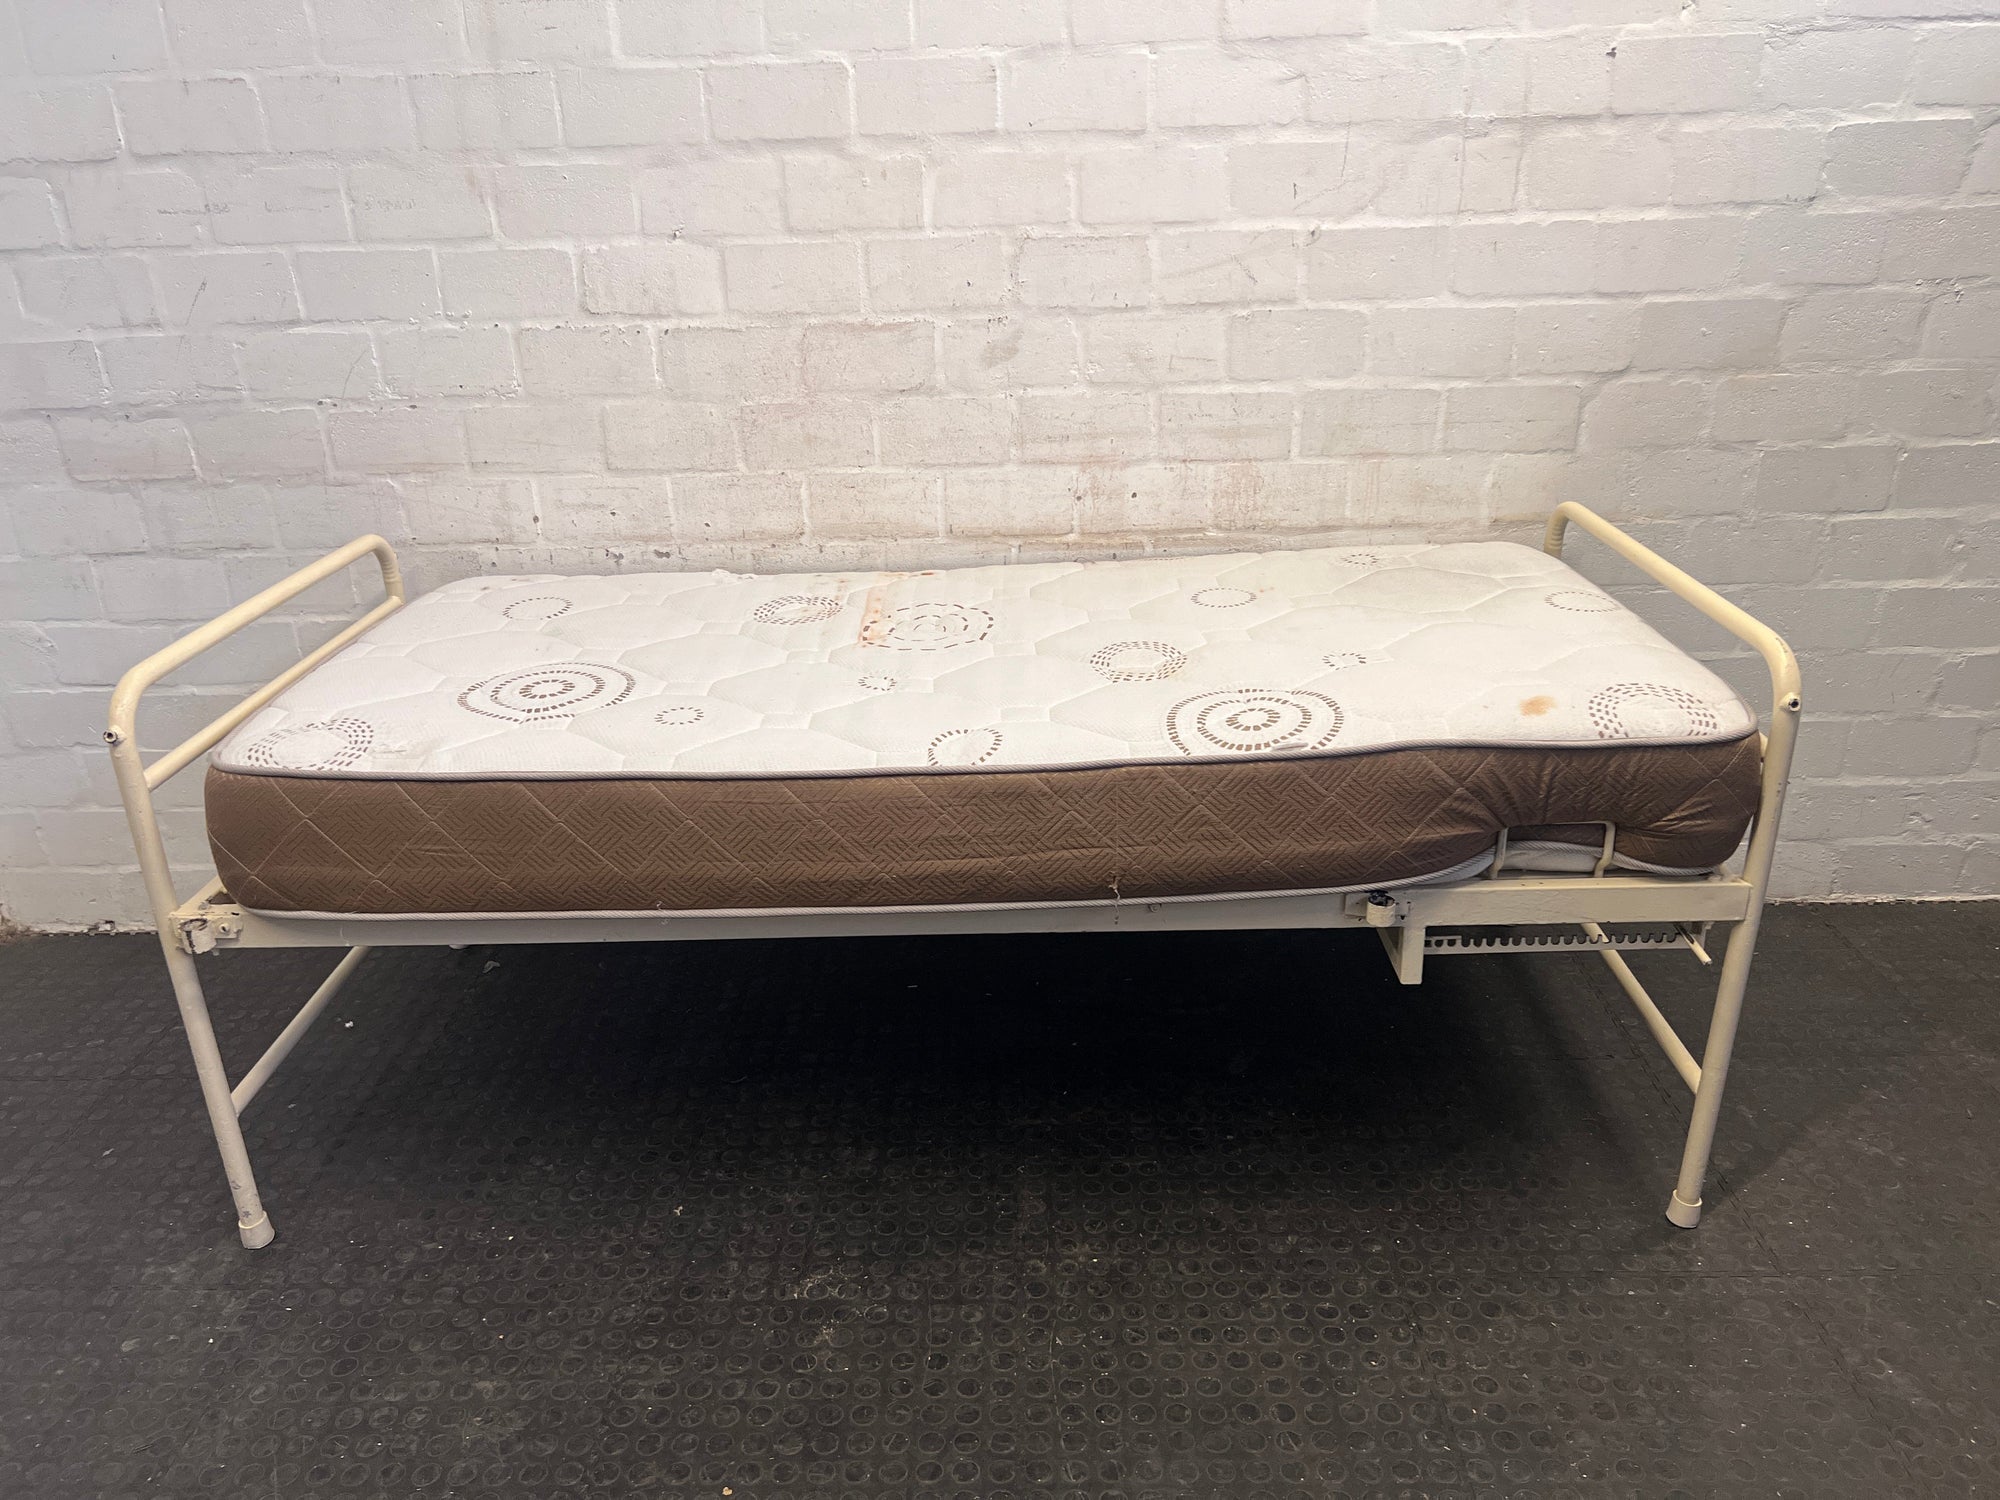 Hospital 3/4  Bed with White & Brown Lifestyle Orthopeadic Mattress